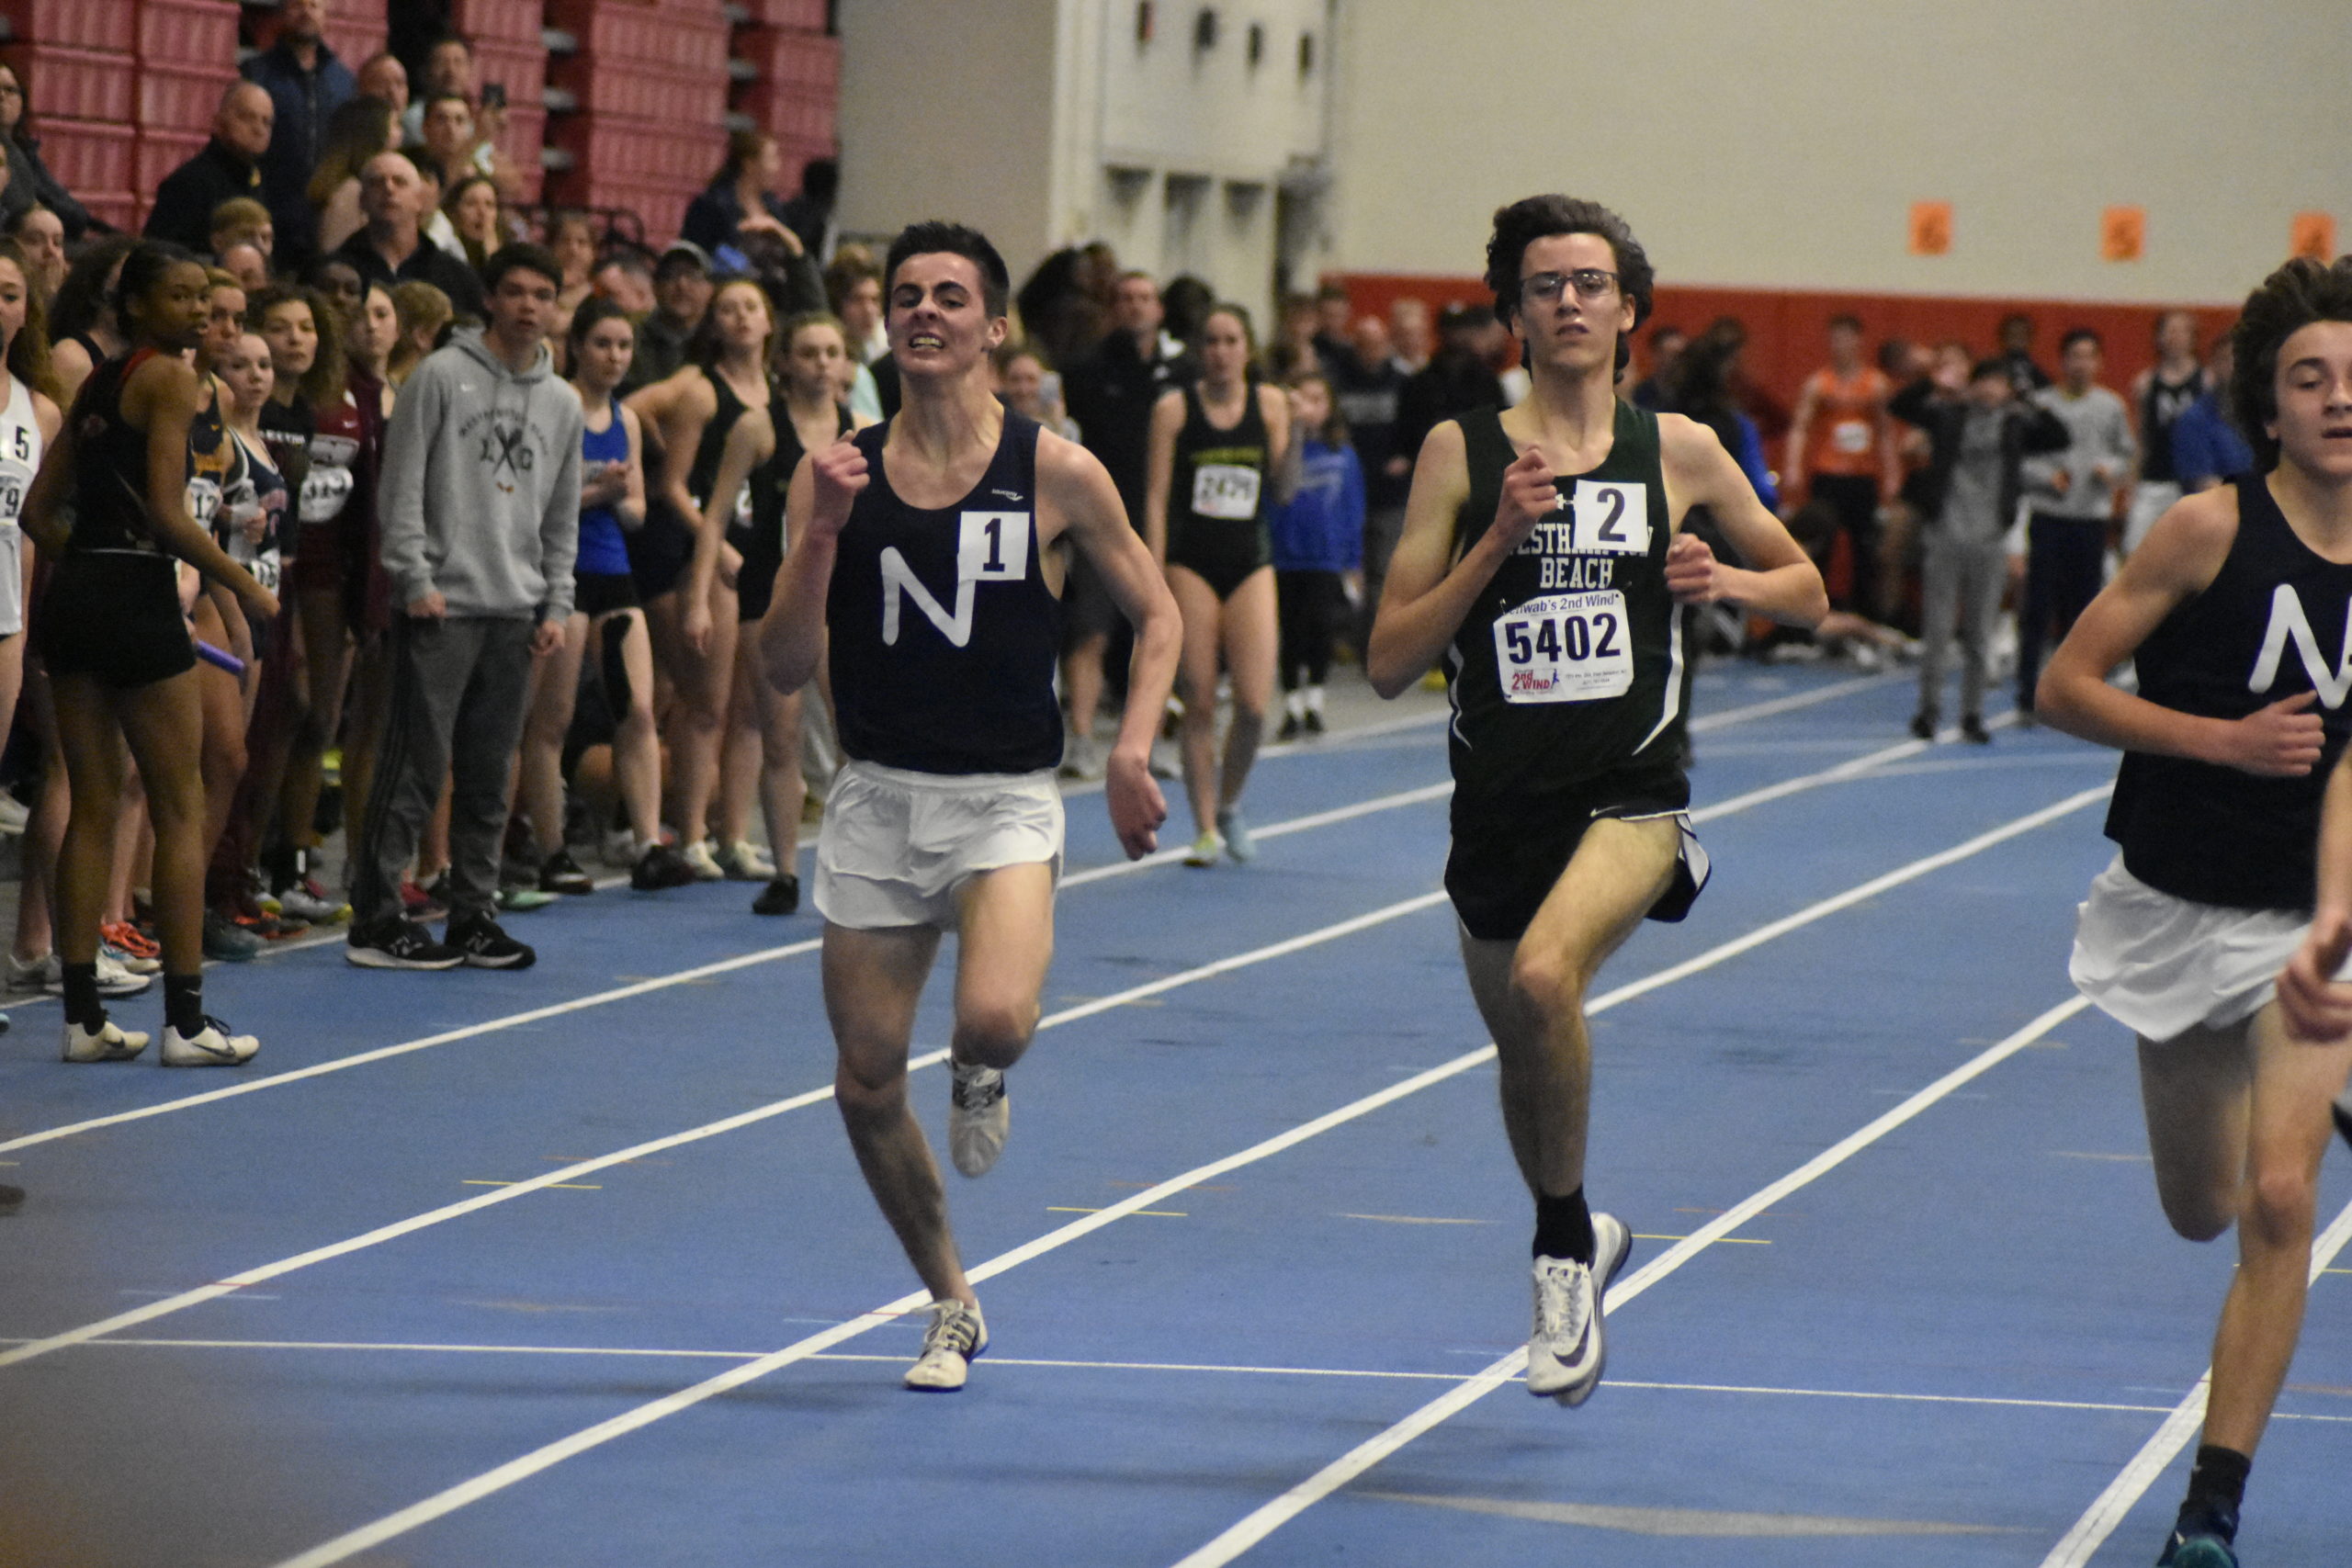 Northport's Thomas Fodor and Gavin Ehlers of Westhampton Beach down the final stretch of the 3,200-meter race.